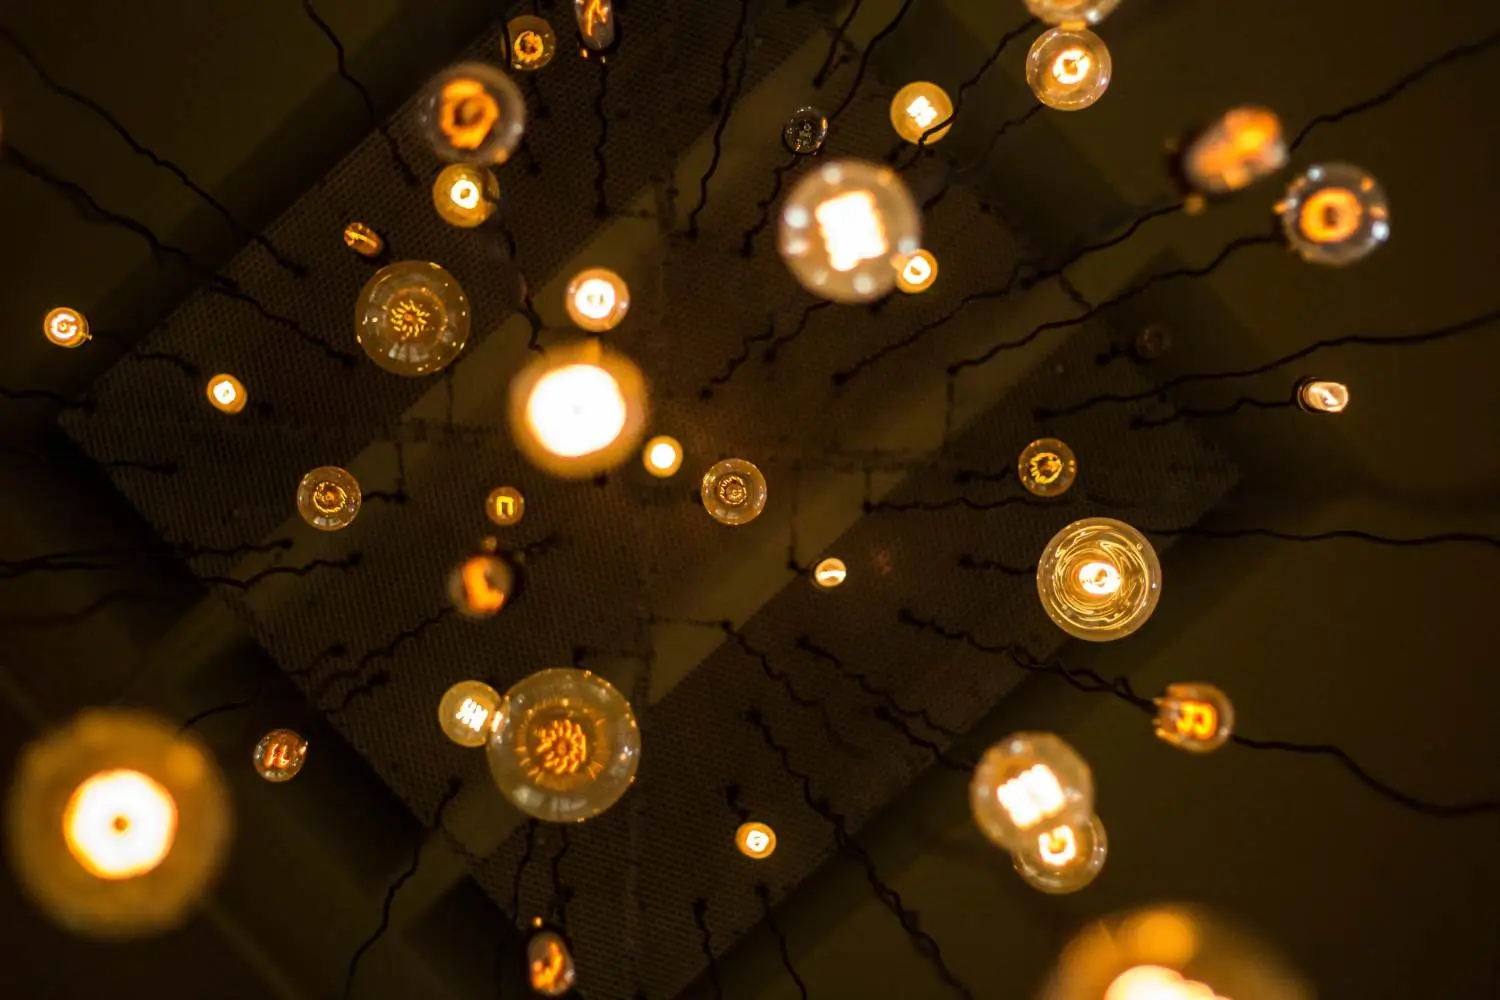 Lights hanging from ceiling in Historical Market Trends image